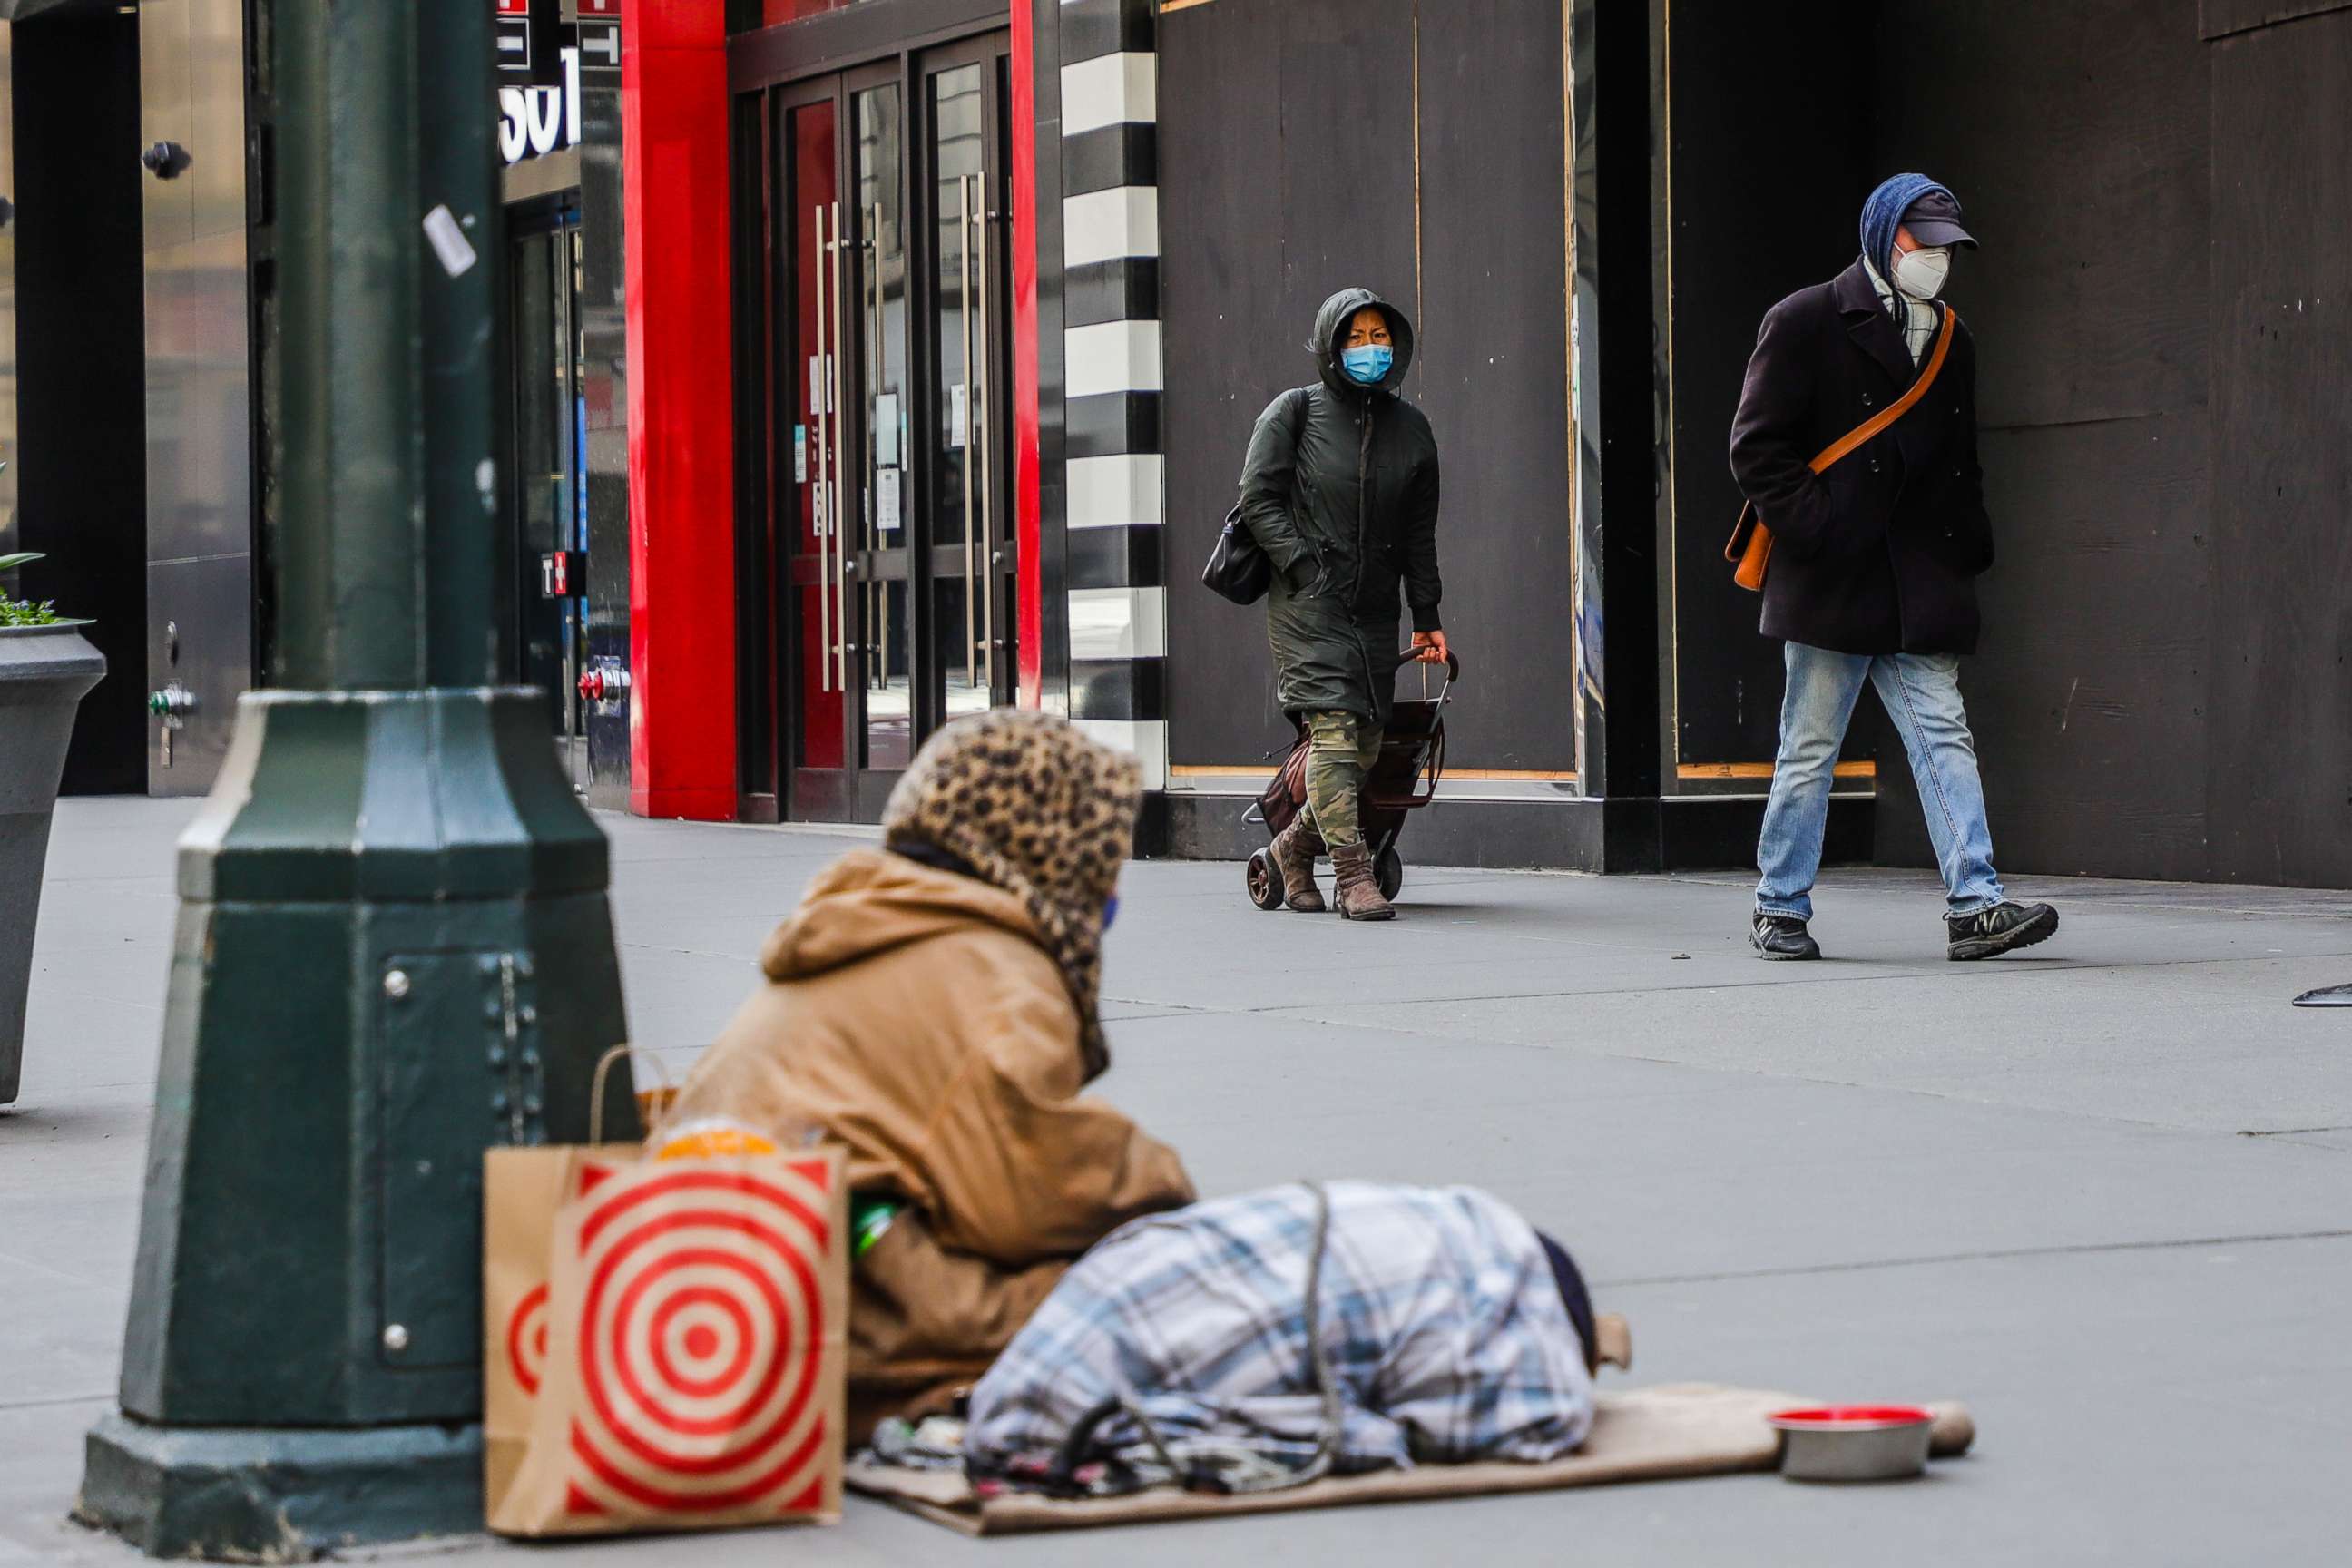 PHOTO: People wearing masks walk in front of a homeless person in New York during the COVID-19 coronavirus pandemic, April 17, 2020.